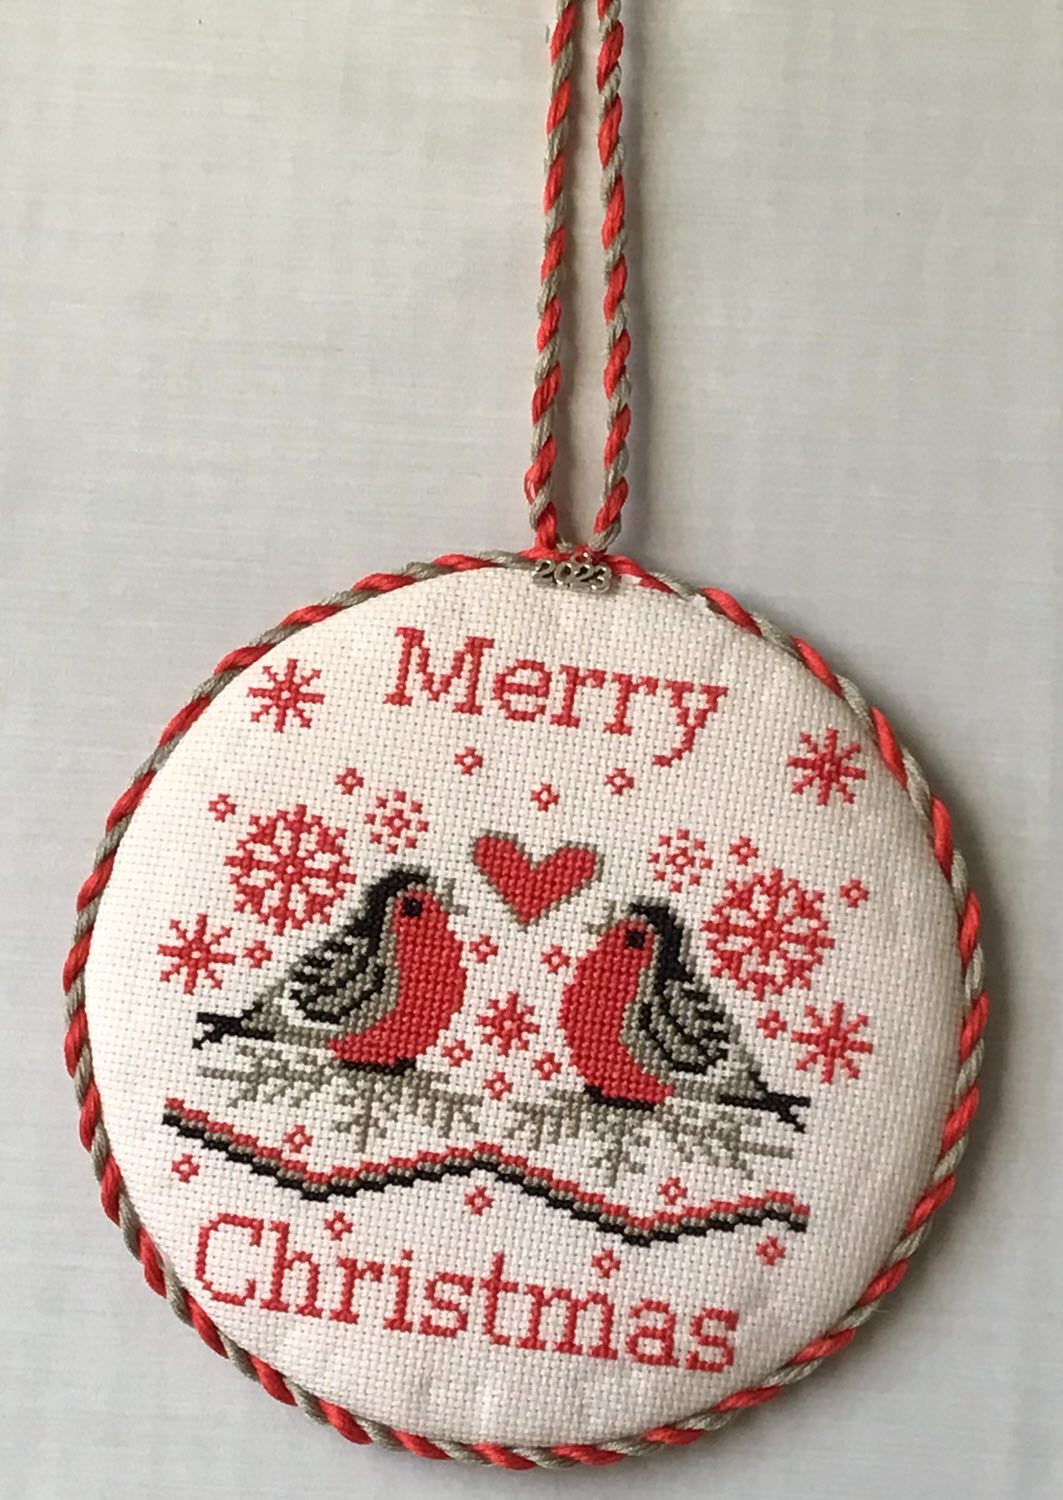 Pat's Cross-Stitch Corner – Page 2 – A Place to Share a Craft I Love